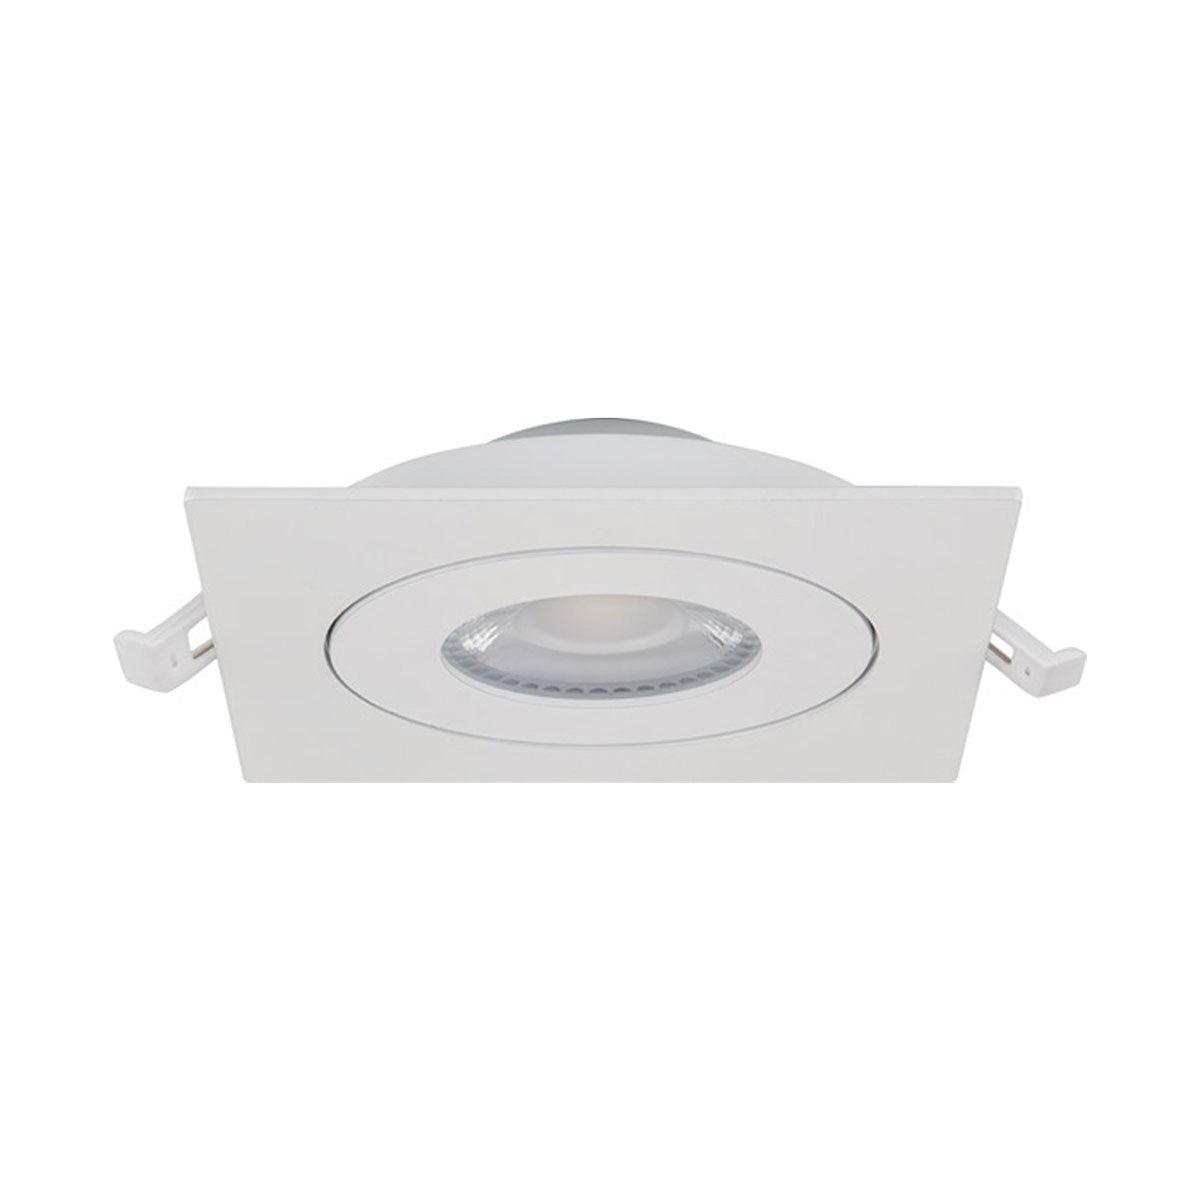 4 Inch Gimbal Canless LED Recessed Light, Square, 9 Watt, 750 Lumens, Selectable CCT, 2700K to 5000K, Remote Driver, White Finish